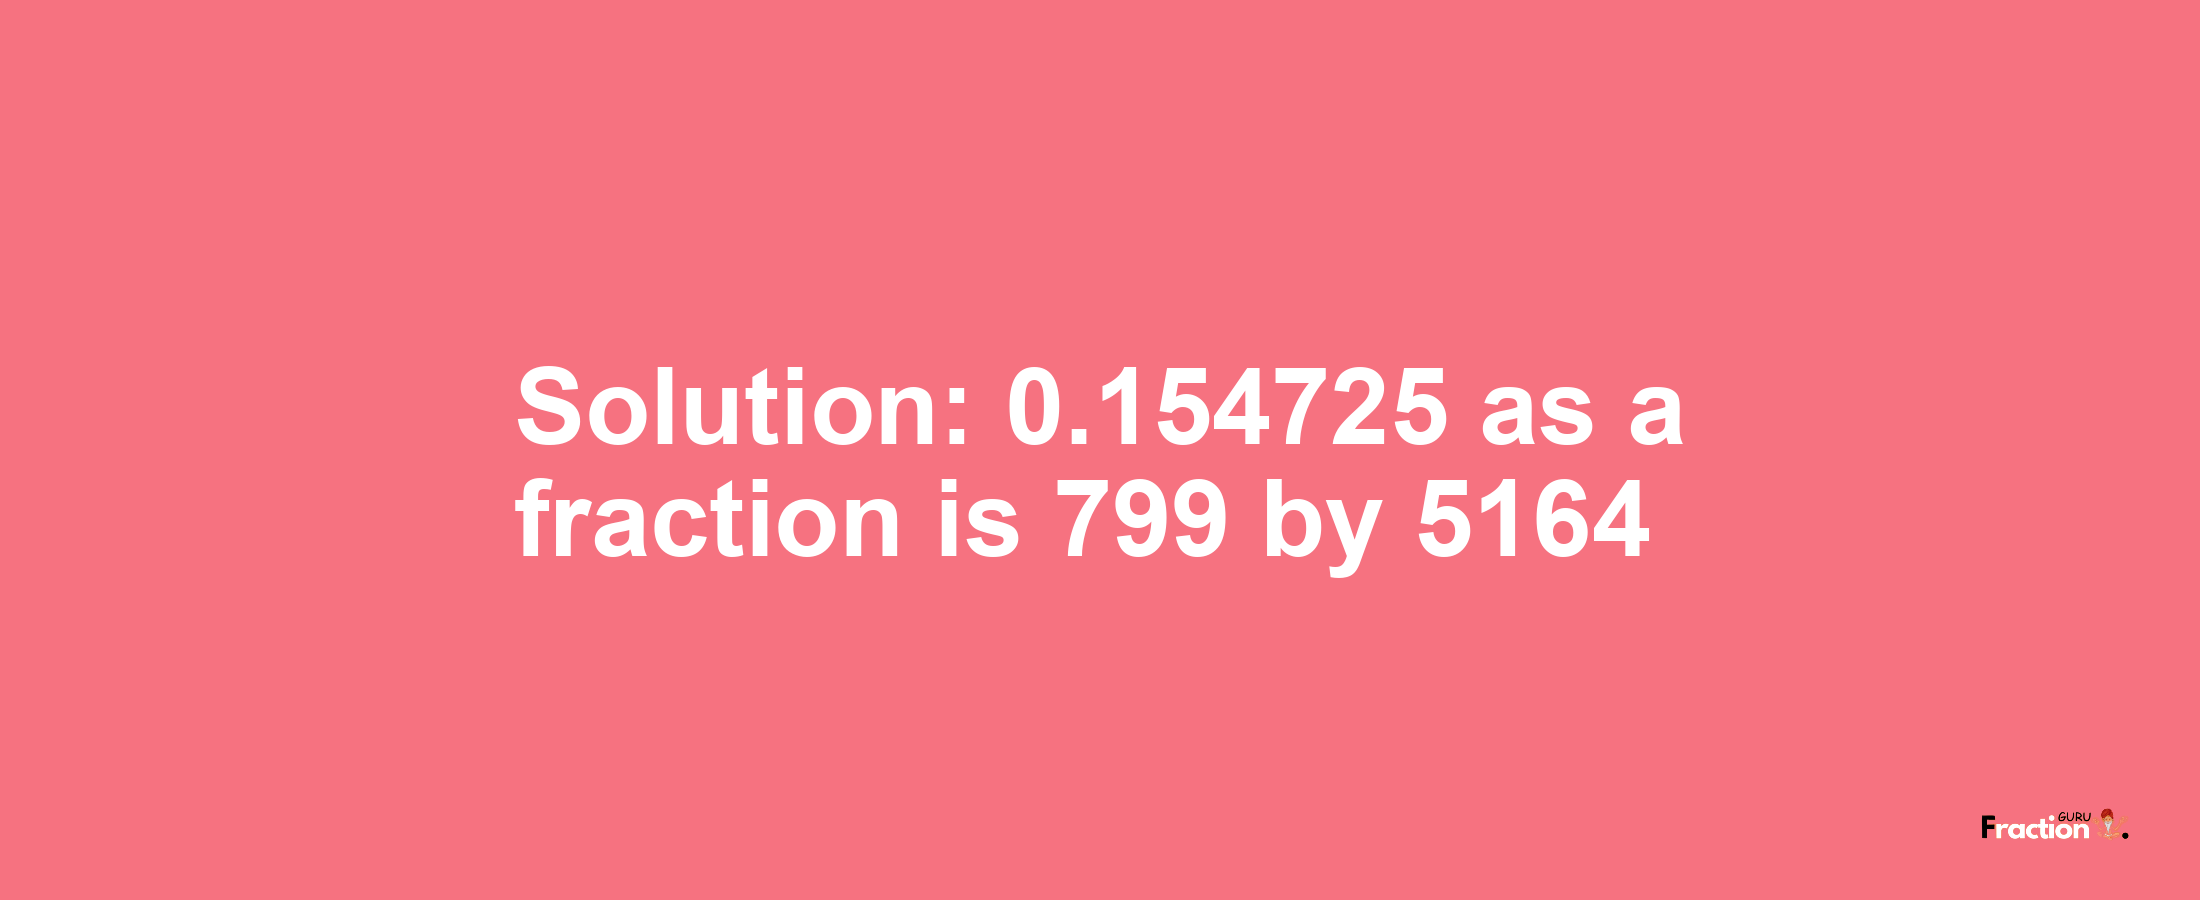 Solution:0.154725 as a fraction is 799/5164